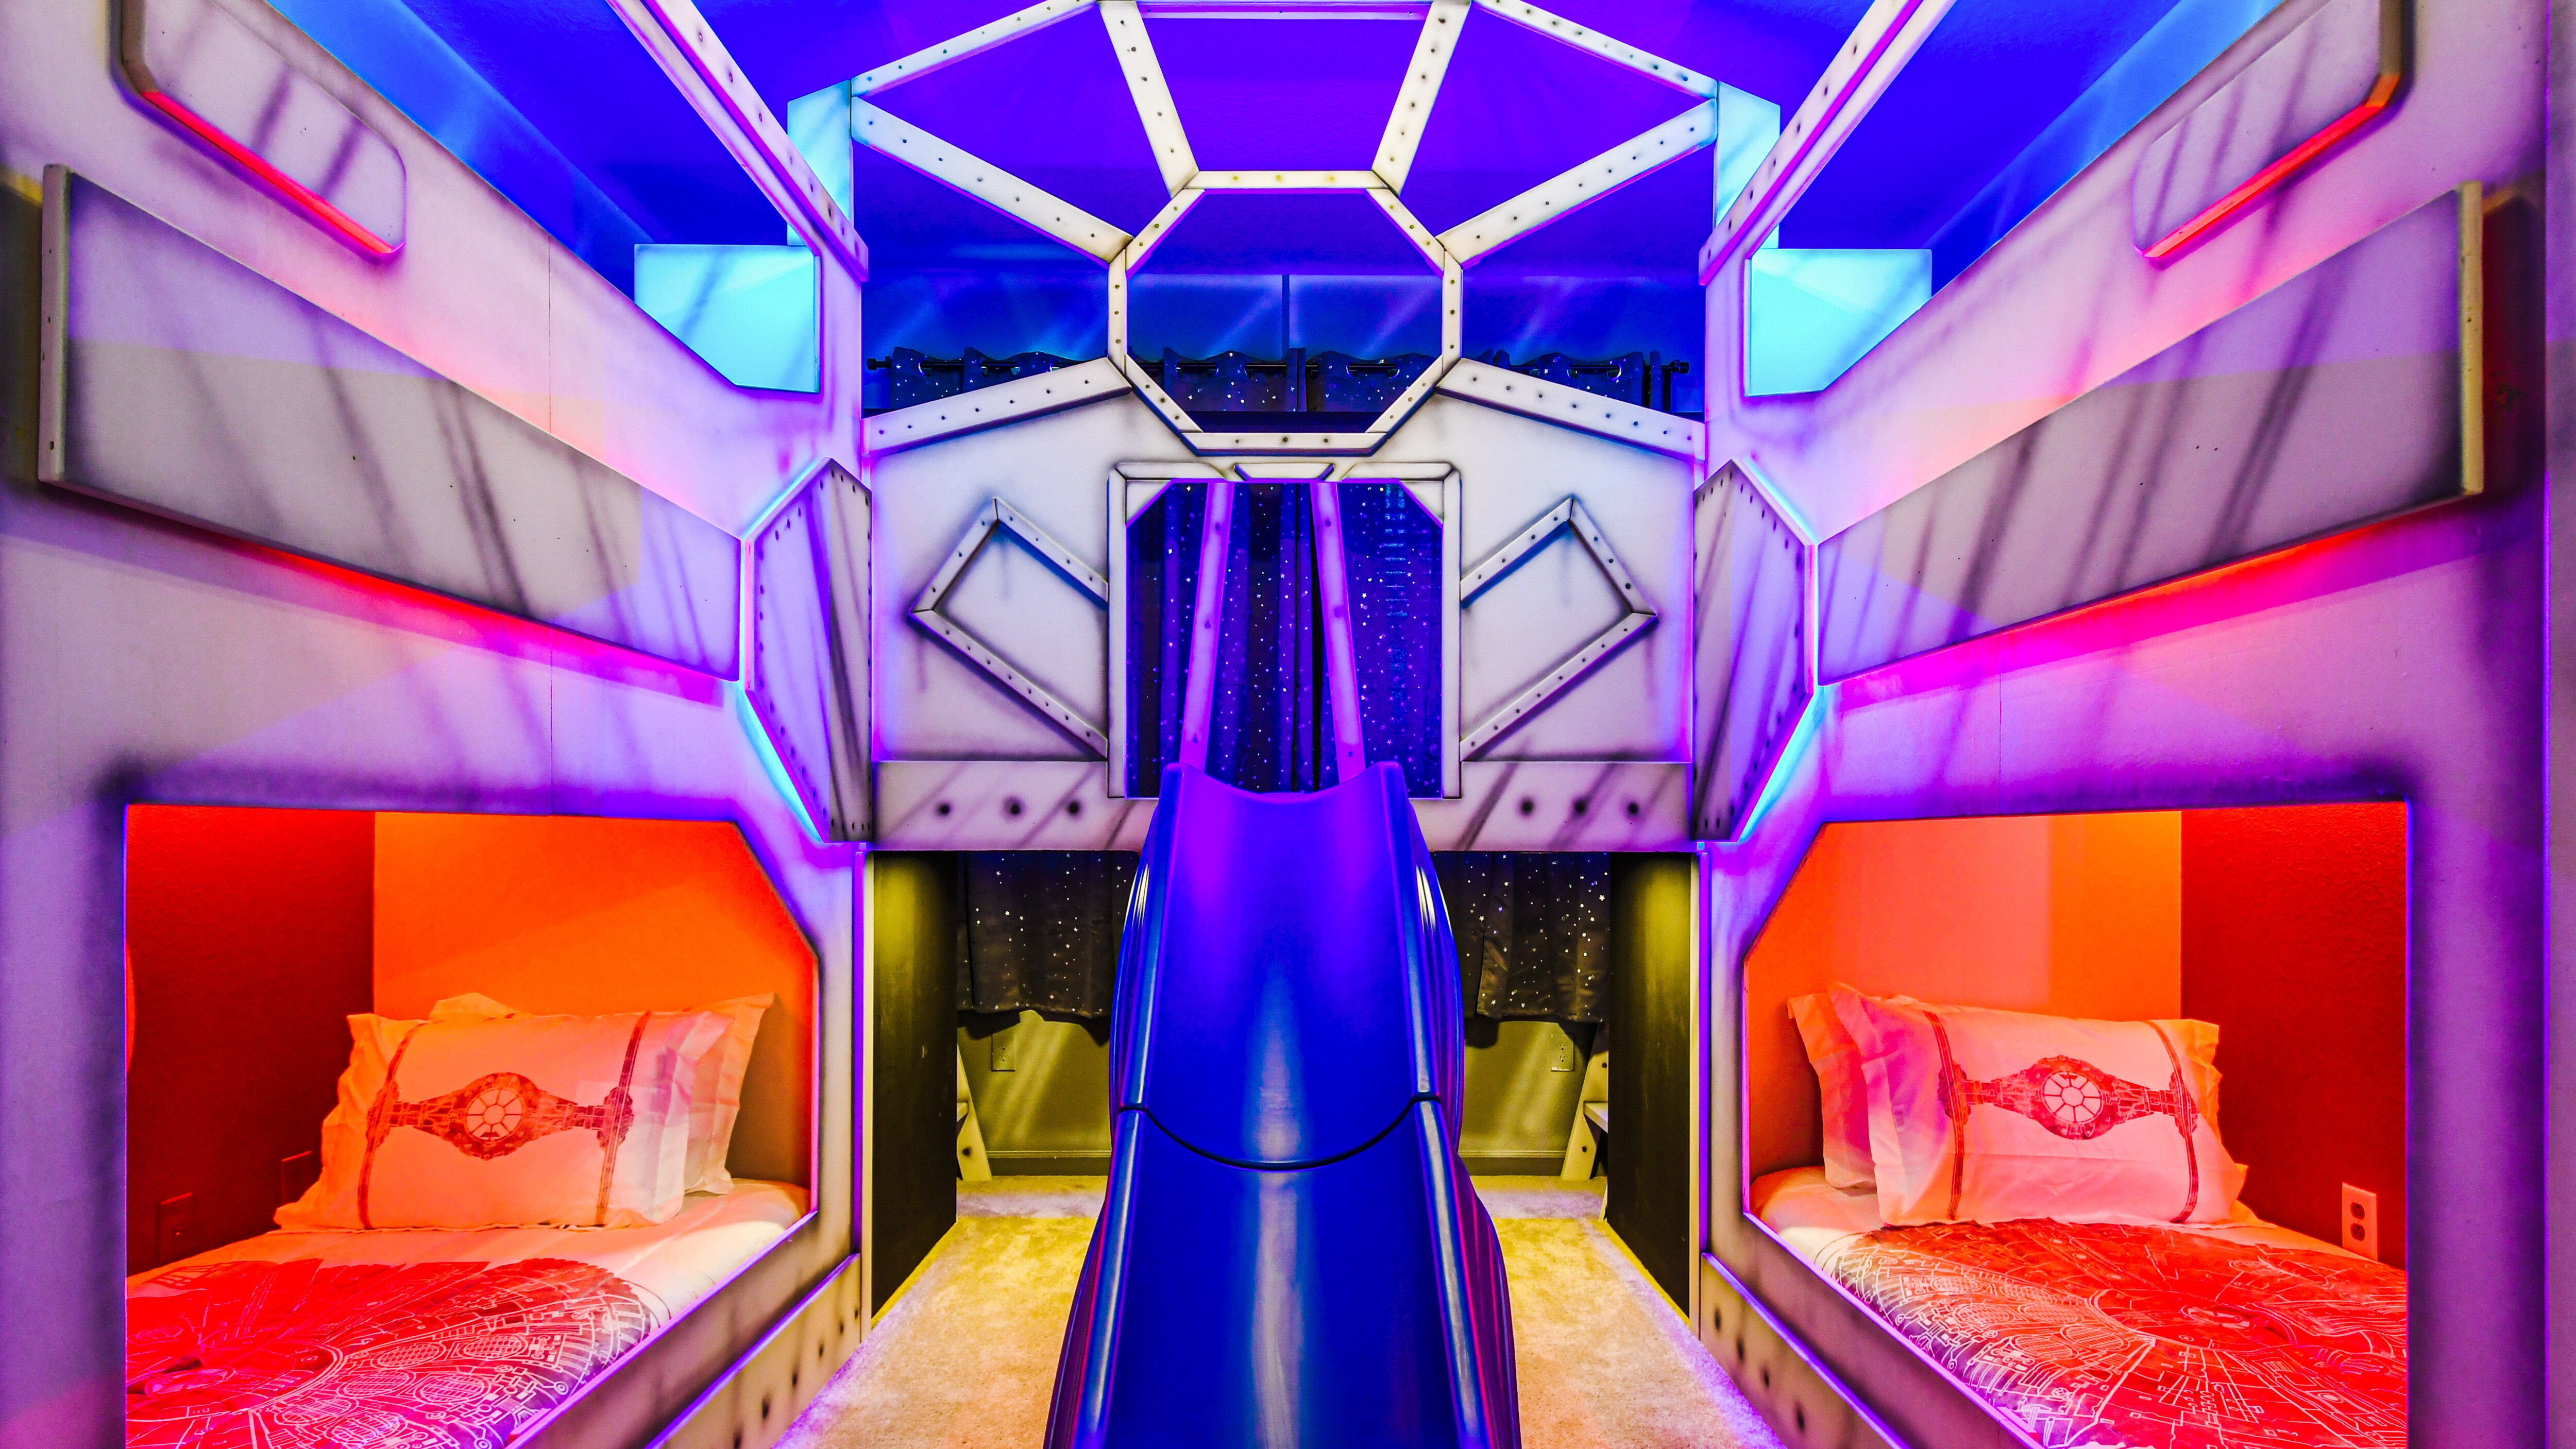 Ignite the spirit of adventure in the Star Wars-themed room featuring twin bunk beds